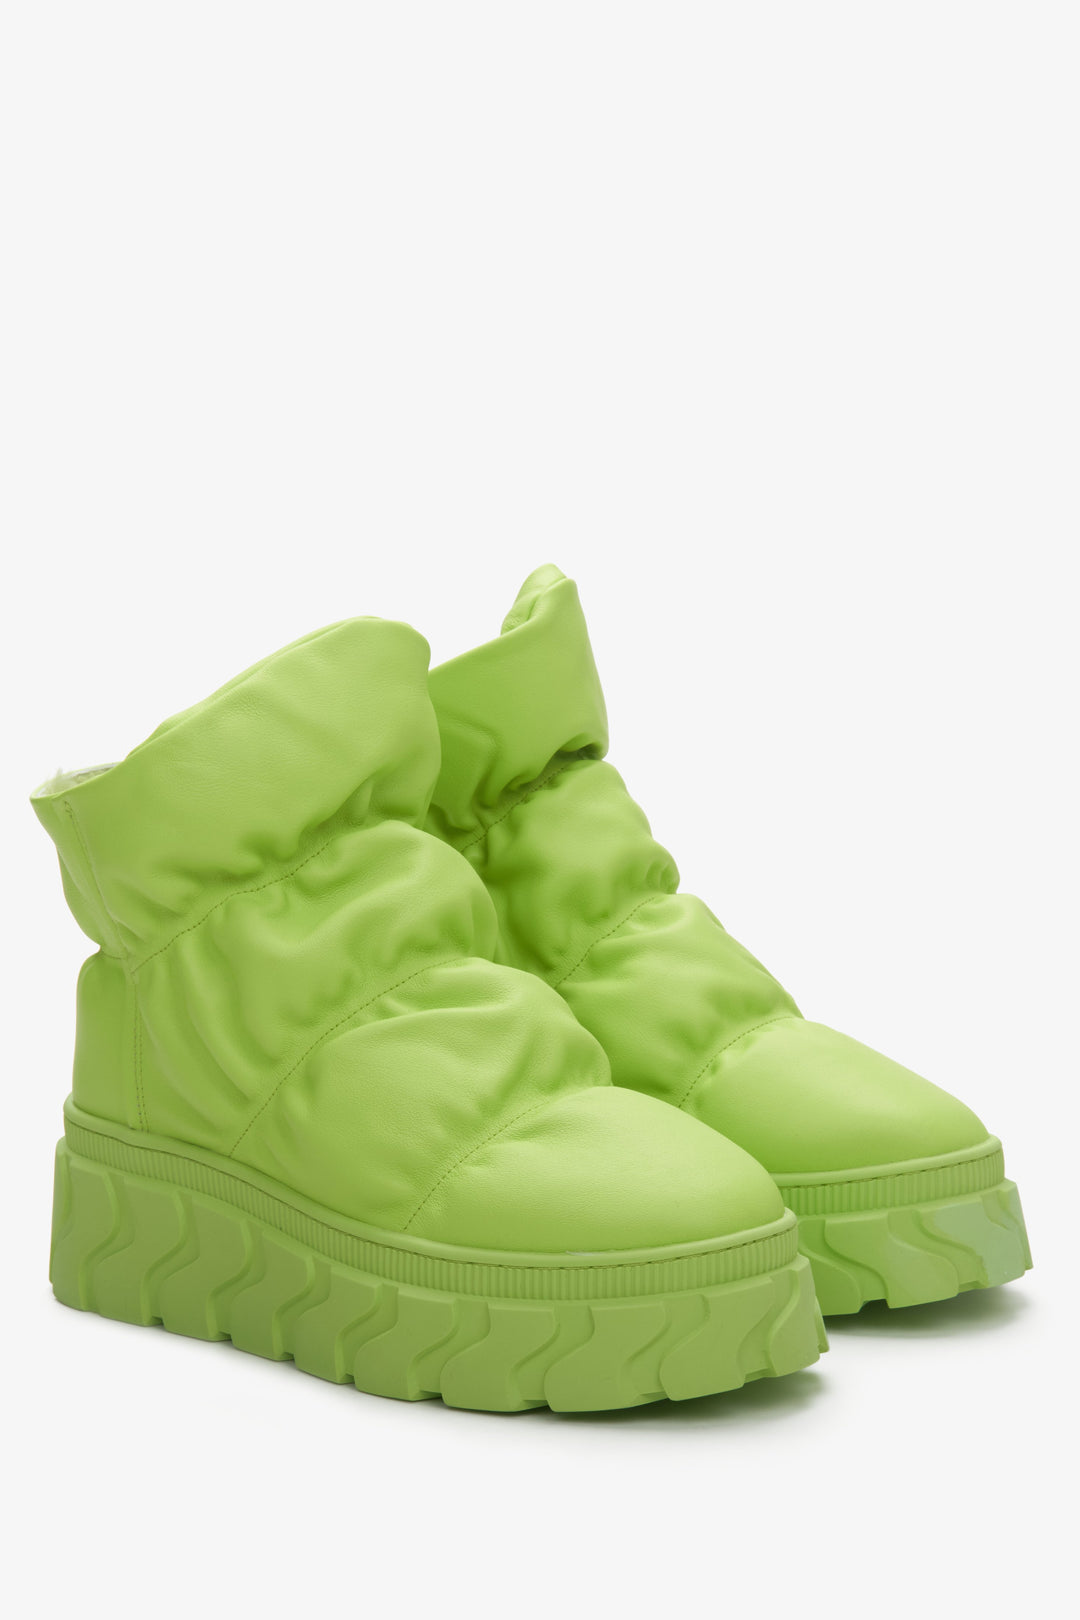 Women's snow boots in green.